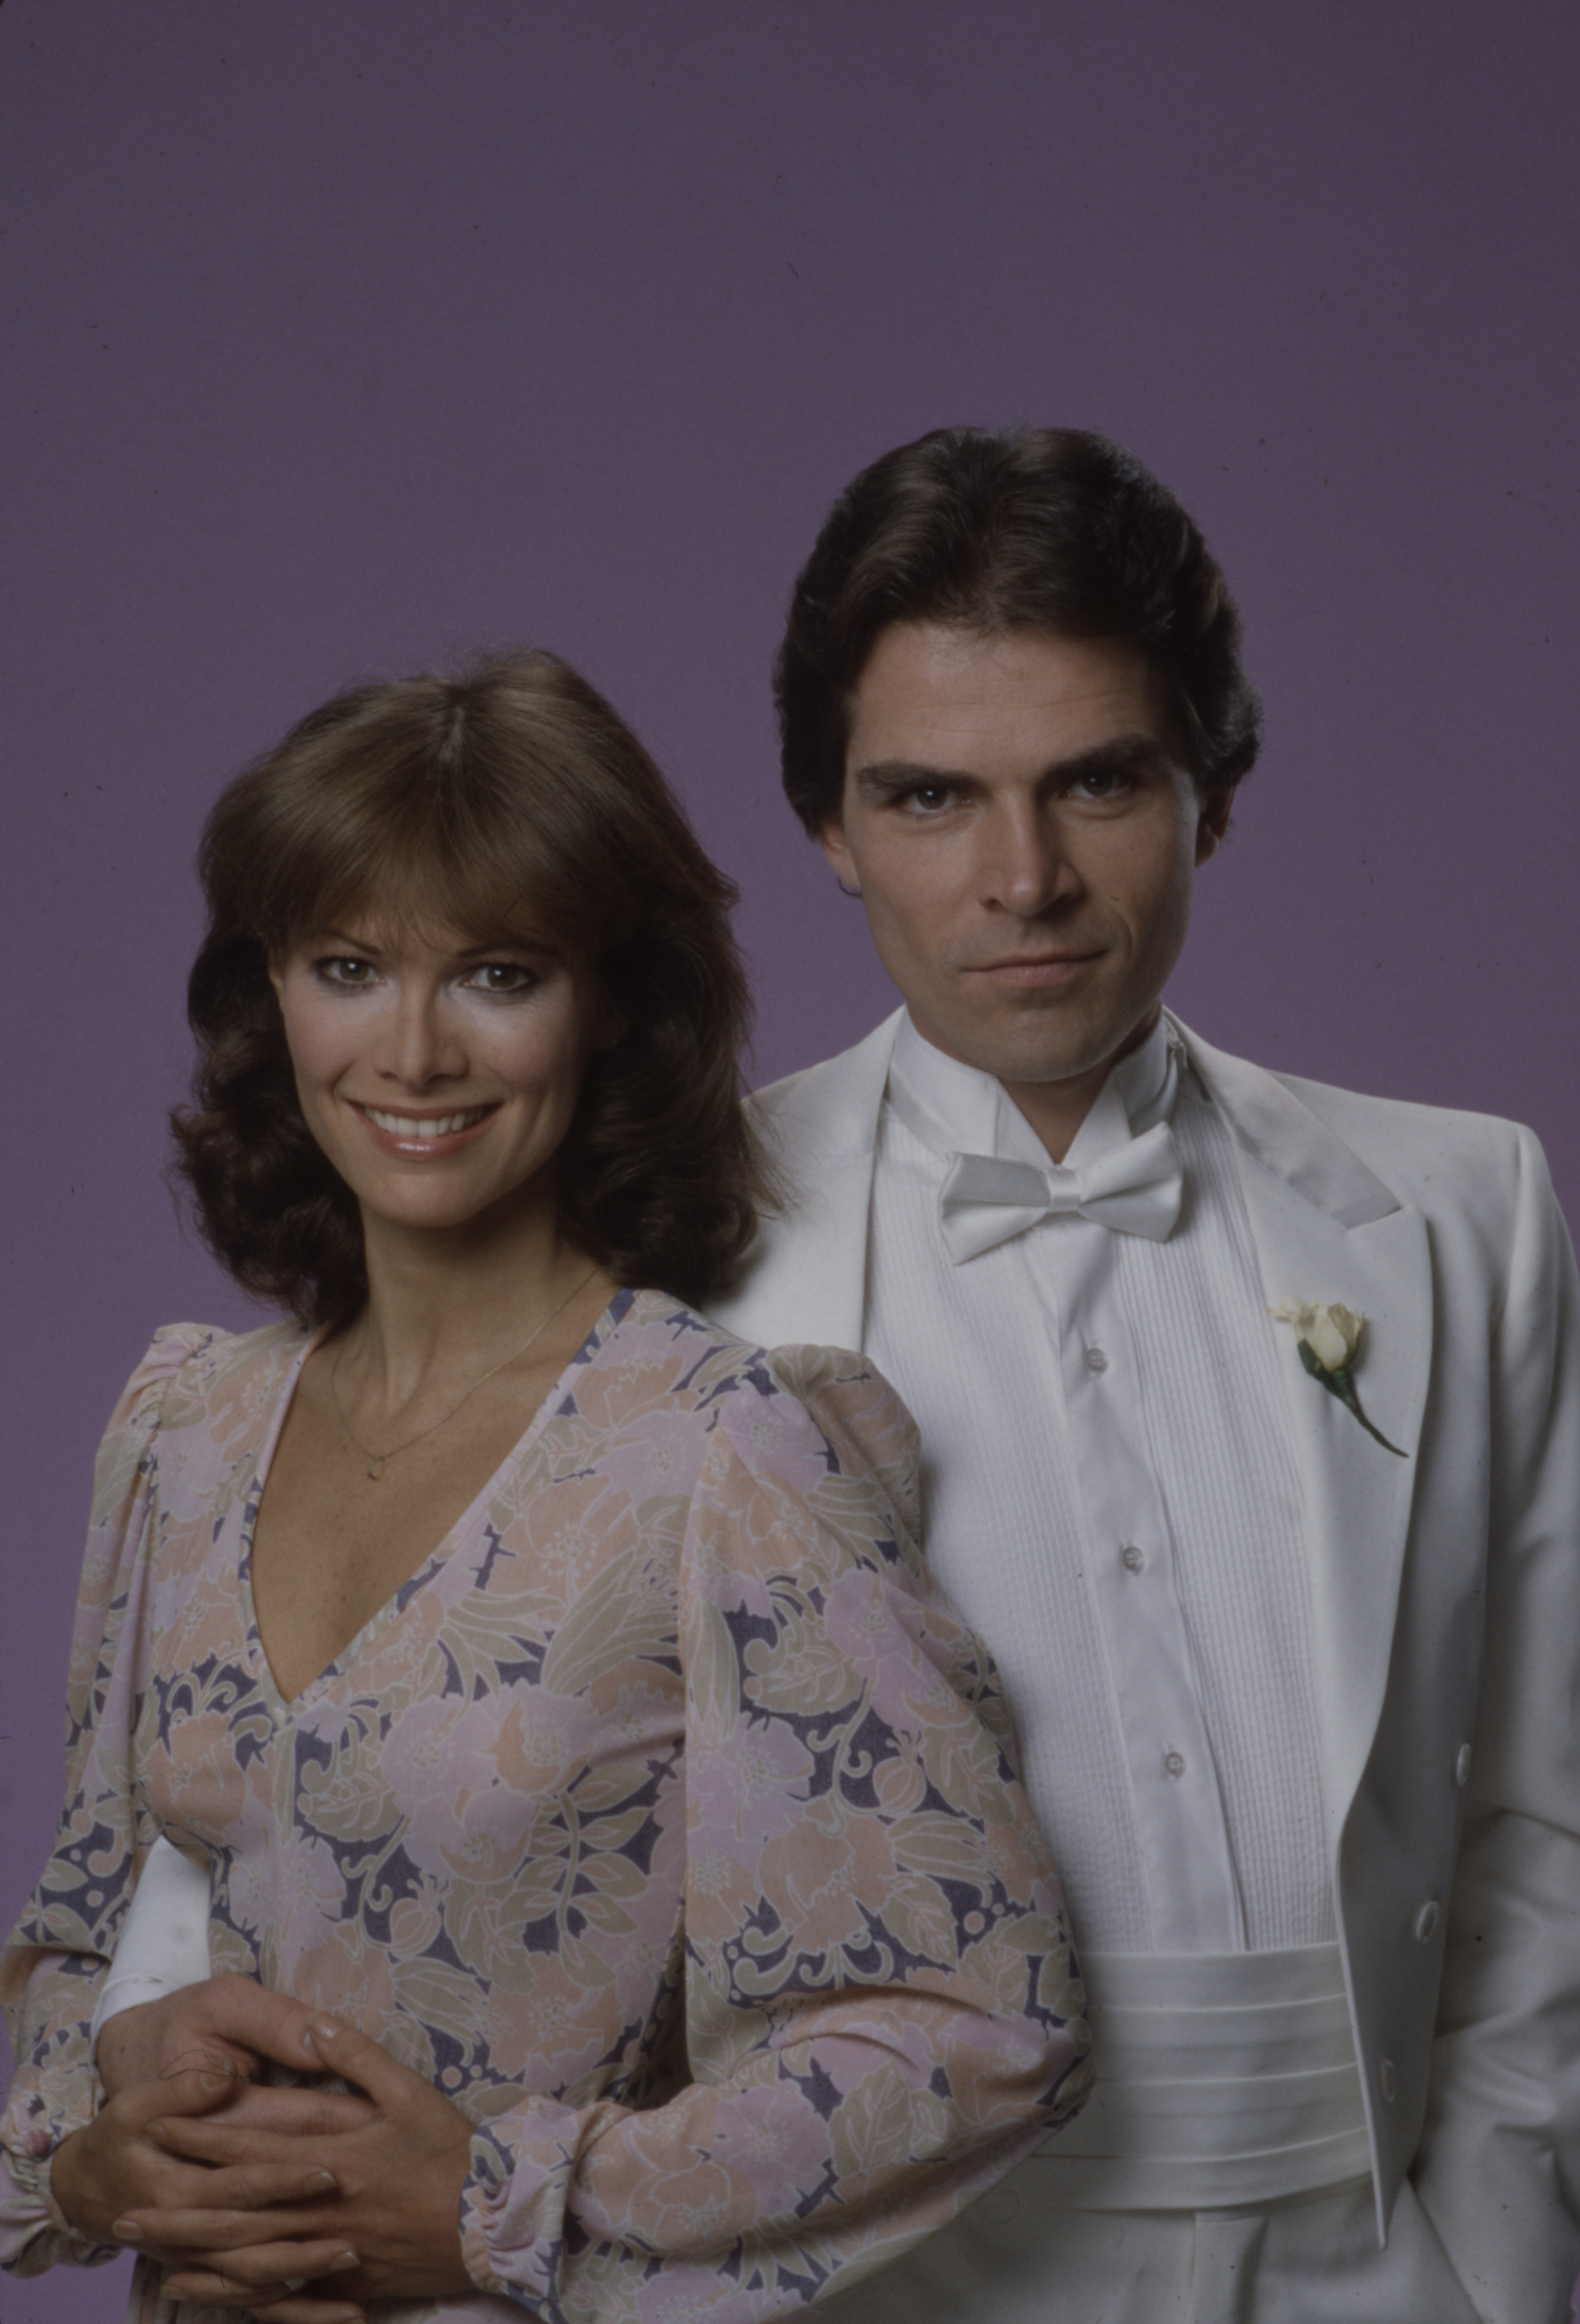 Sharon Gabet and Larkin Malloy in a promotional photo for the soap opera "The Edge of Night," in 1980 | Source: Getty Images